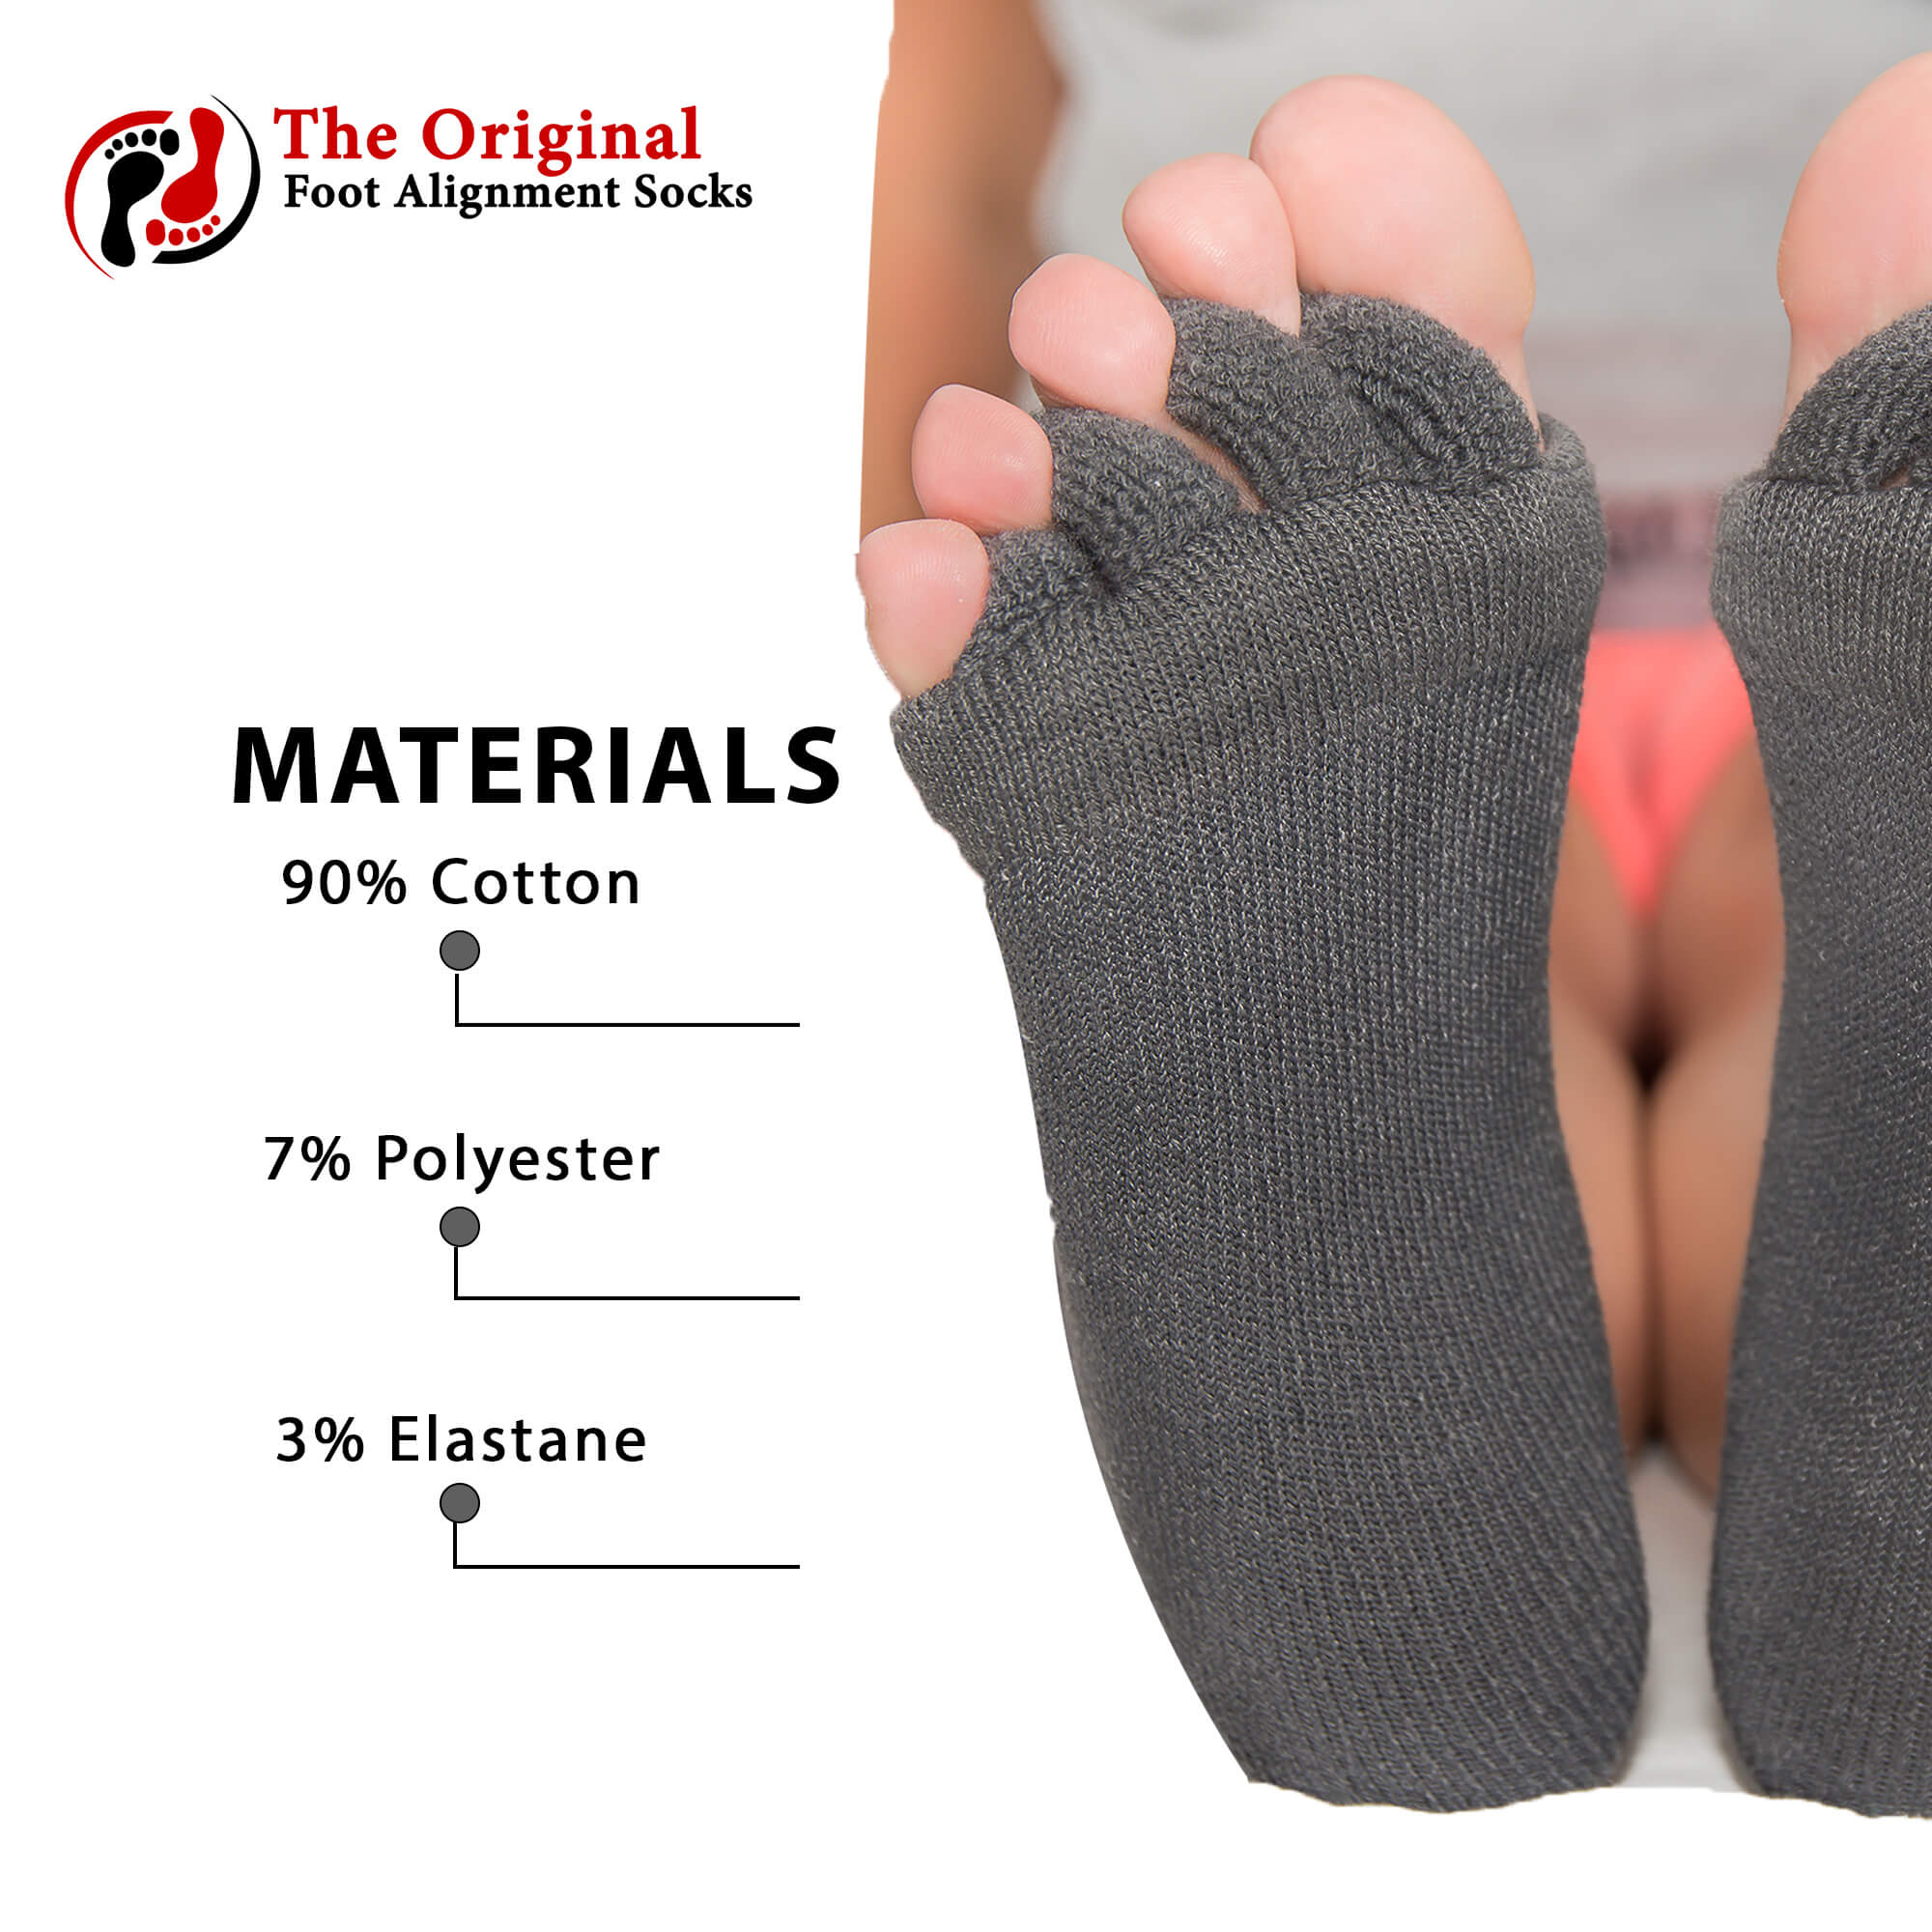 Relieve foot pain and soreness with Charcoal Color Foot Alignment Socks. –  My-Happy Feet - The Original Foot Alignment Socks